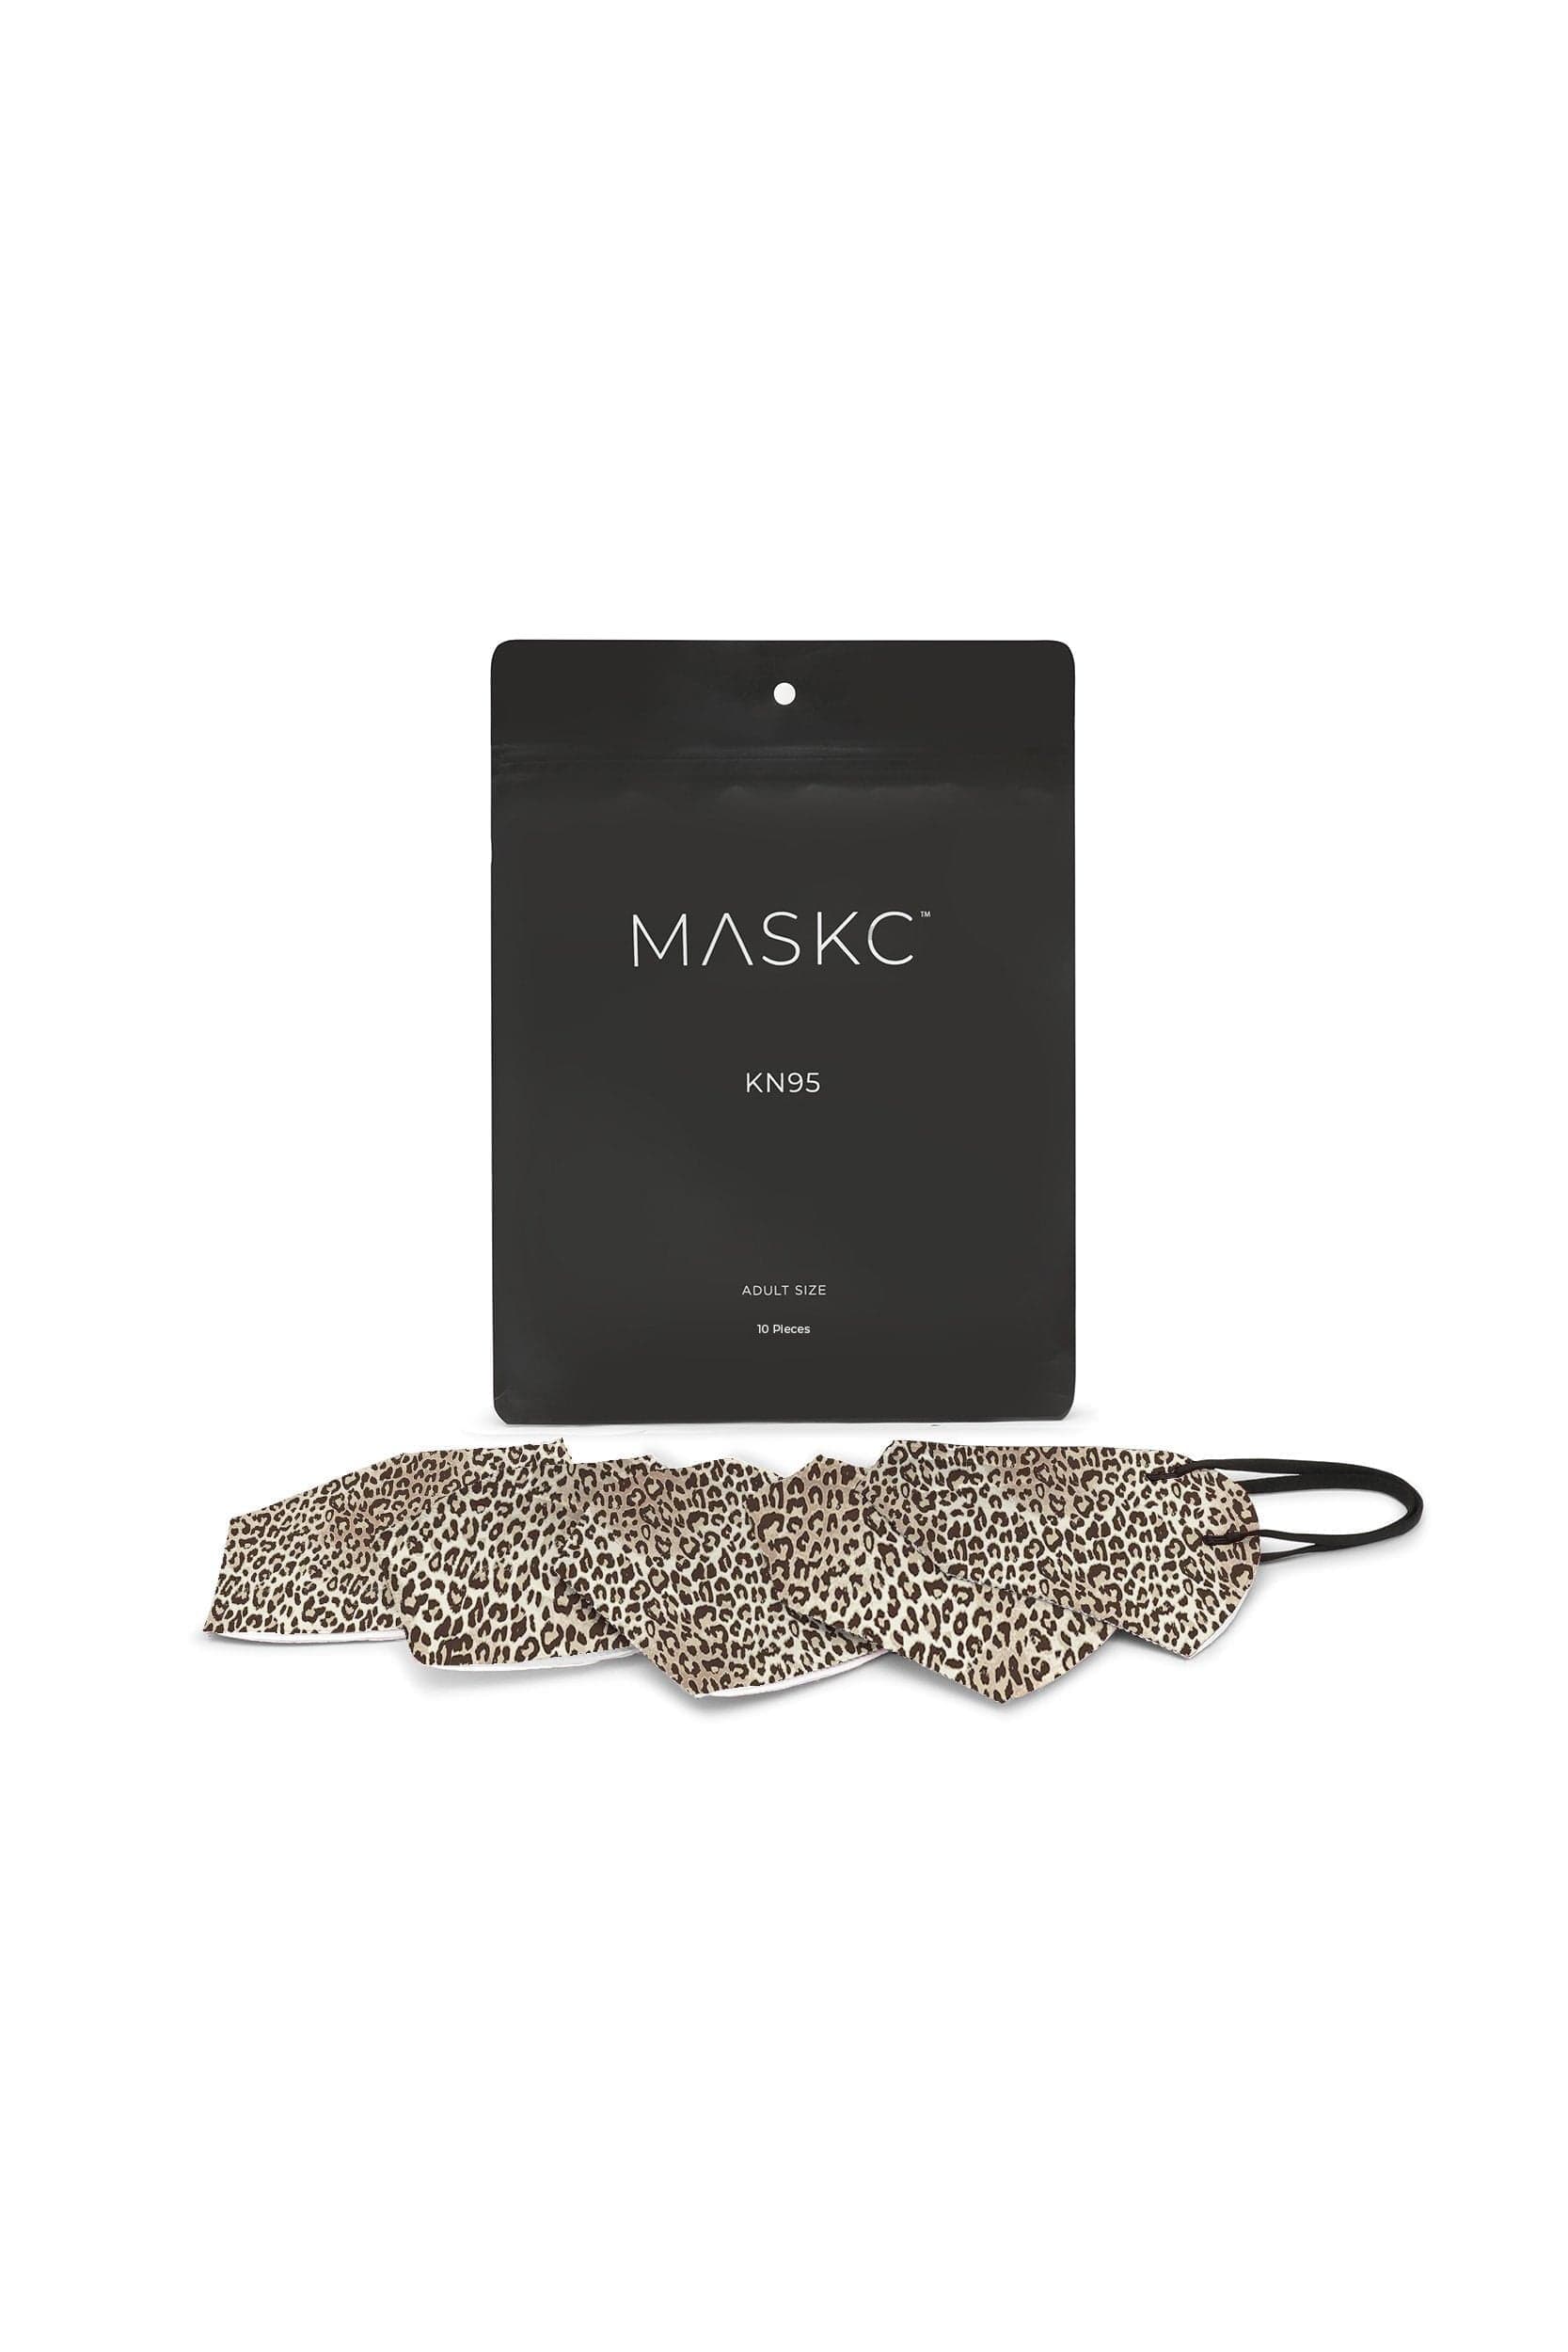 Pack of Leopard Printed KN95 face masks. Each pack contains stylish high quality face masks. 